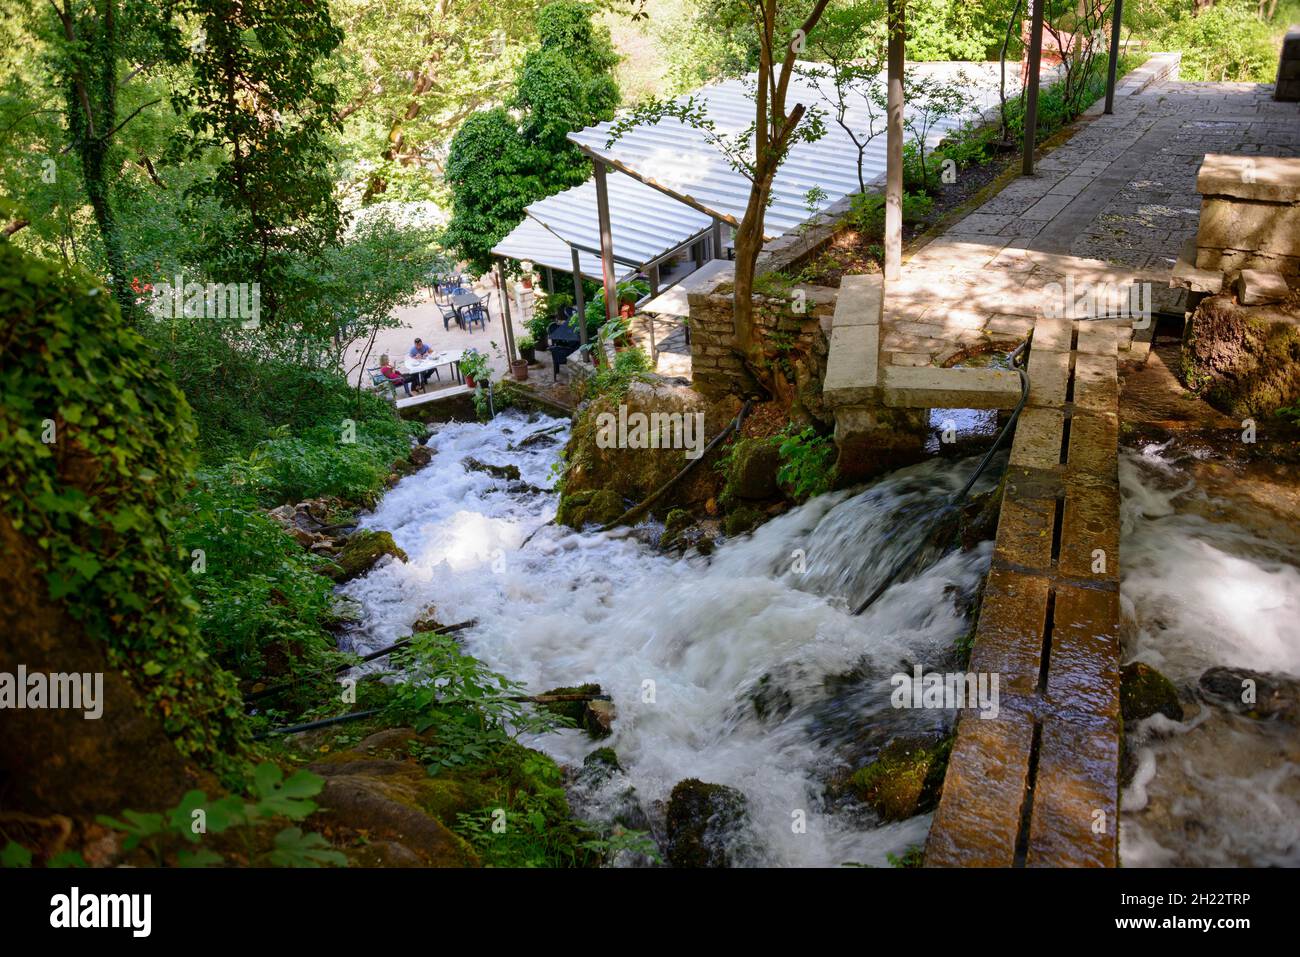 Spring, Cold Water Natural Monument, Uji i Ftothe, Albania Stock Photo